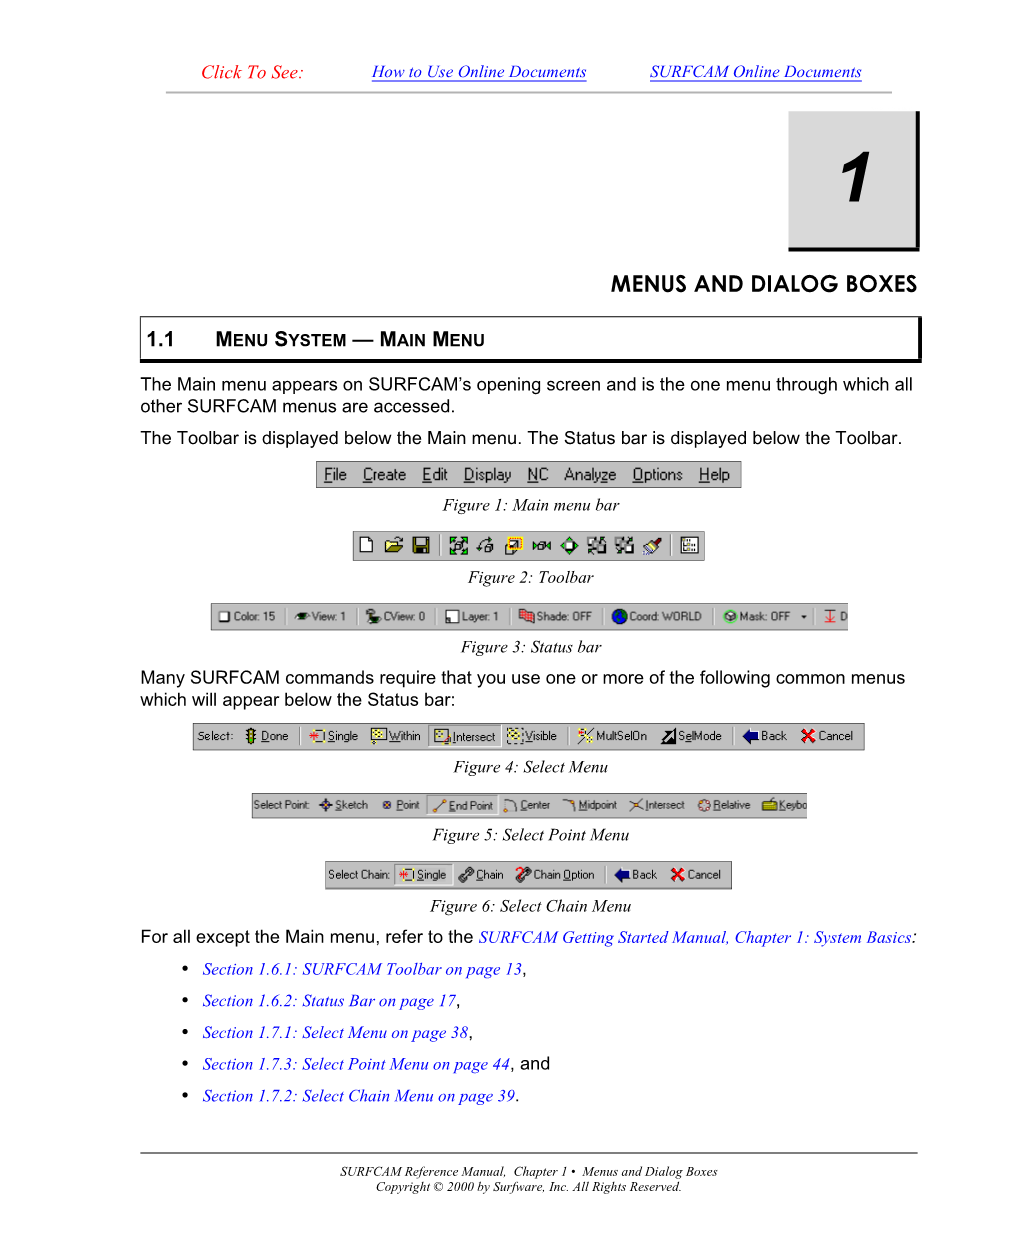 Menus and Dialog Boxes Copyright © 2000 by Surfware, Inc